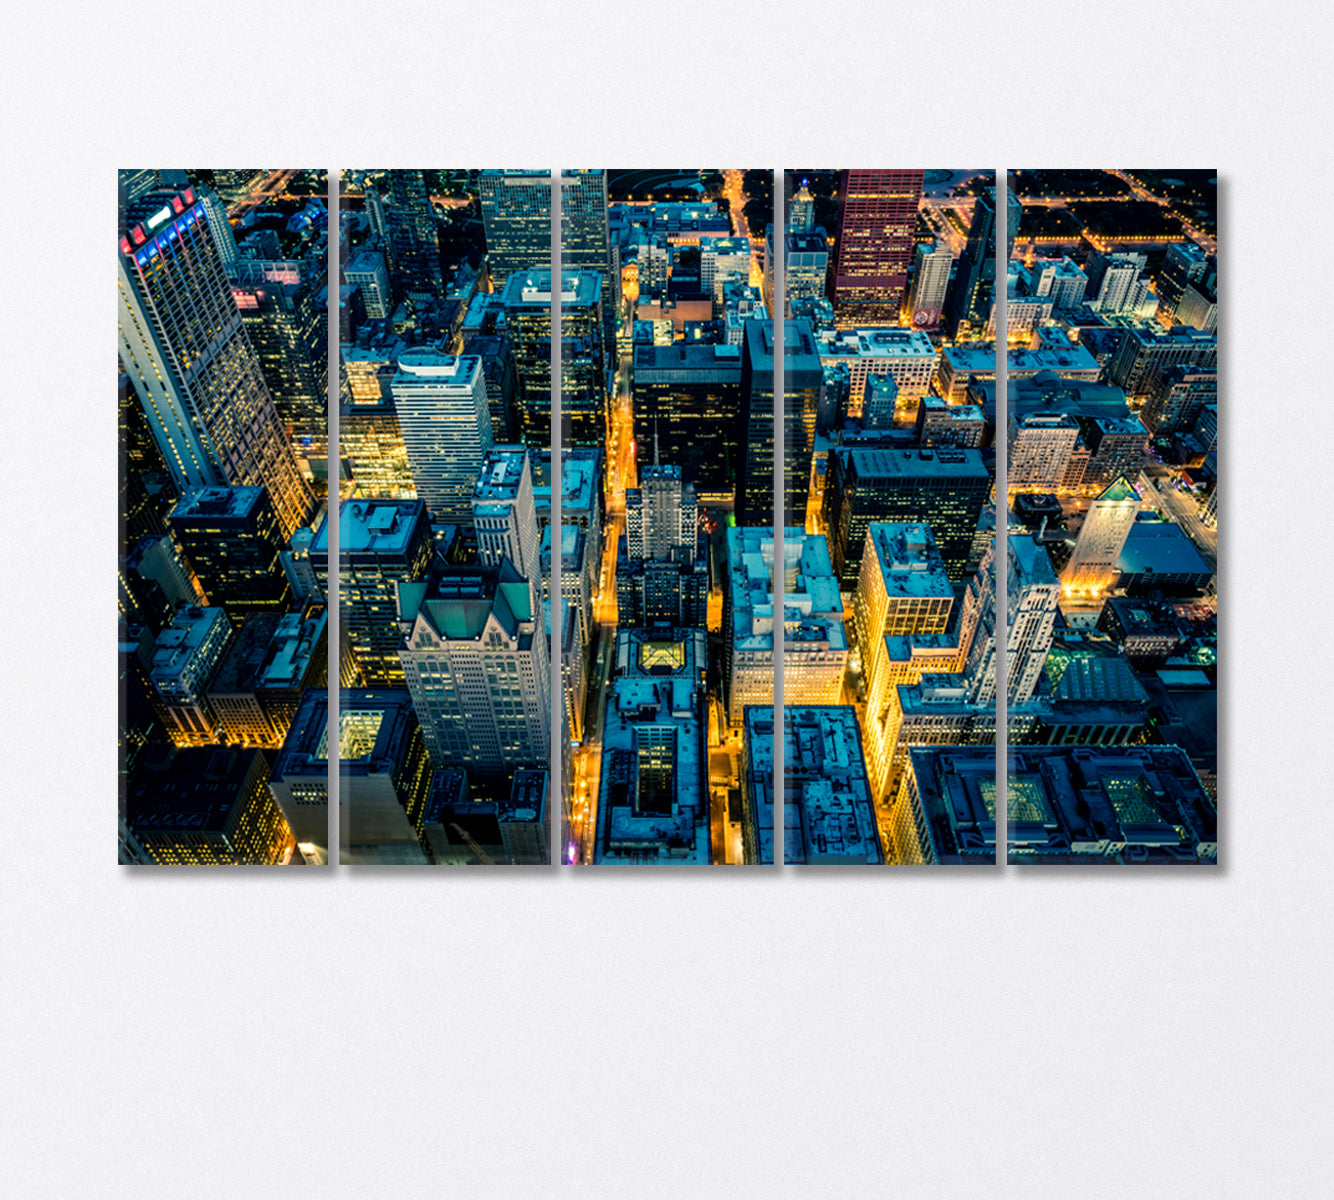 Aerial View of Chicago at Night Canvas Print-Canvas Print-CetArt-5 Panels-36x24 inches-CetArt